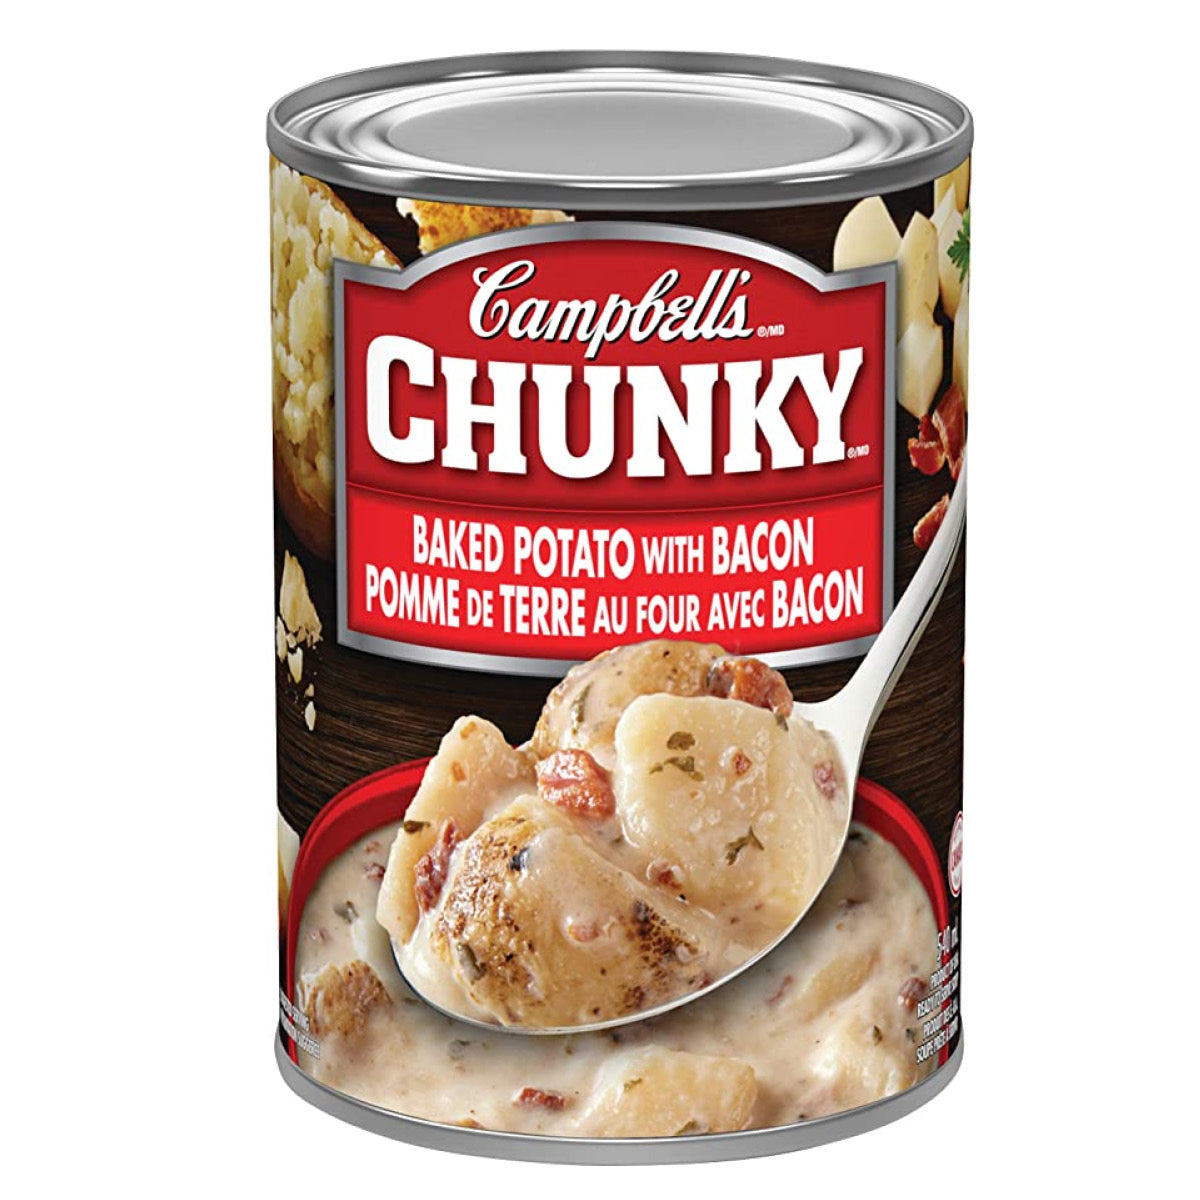 Campbell's Chunky Baked Potato with Bacon Soup, 515ml